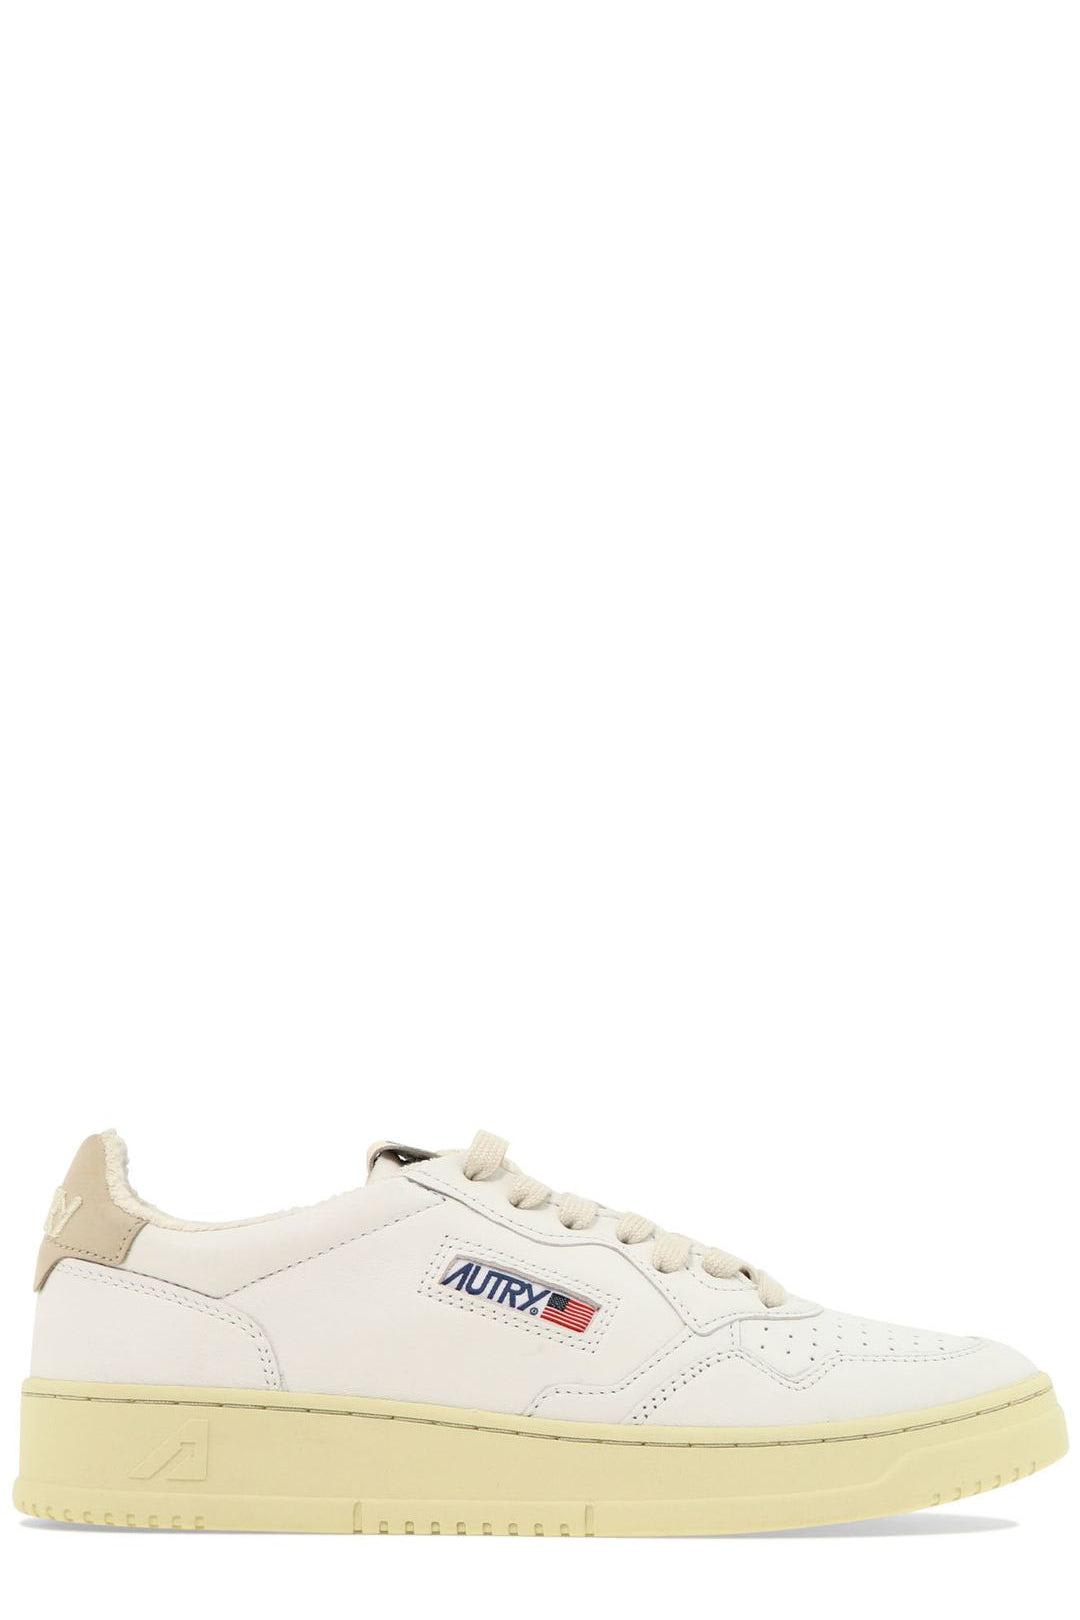 Autry Medalist 01 Lace-up Sneakers